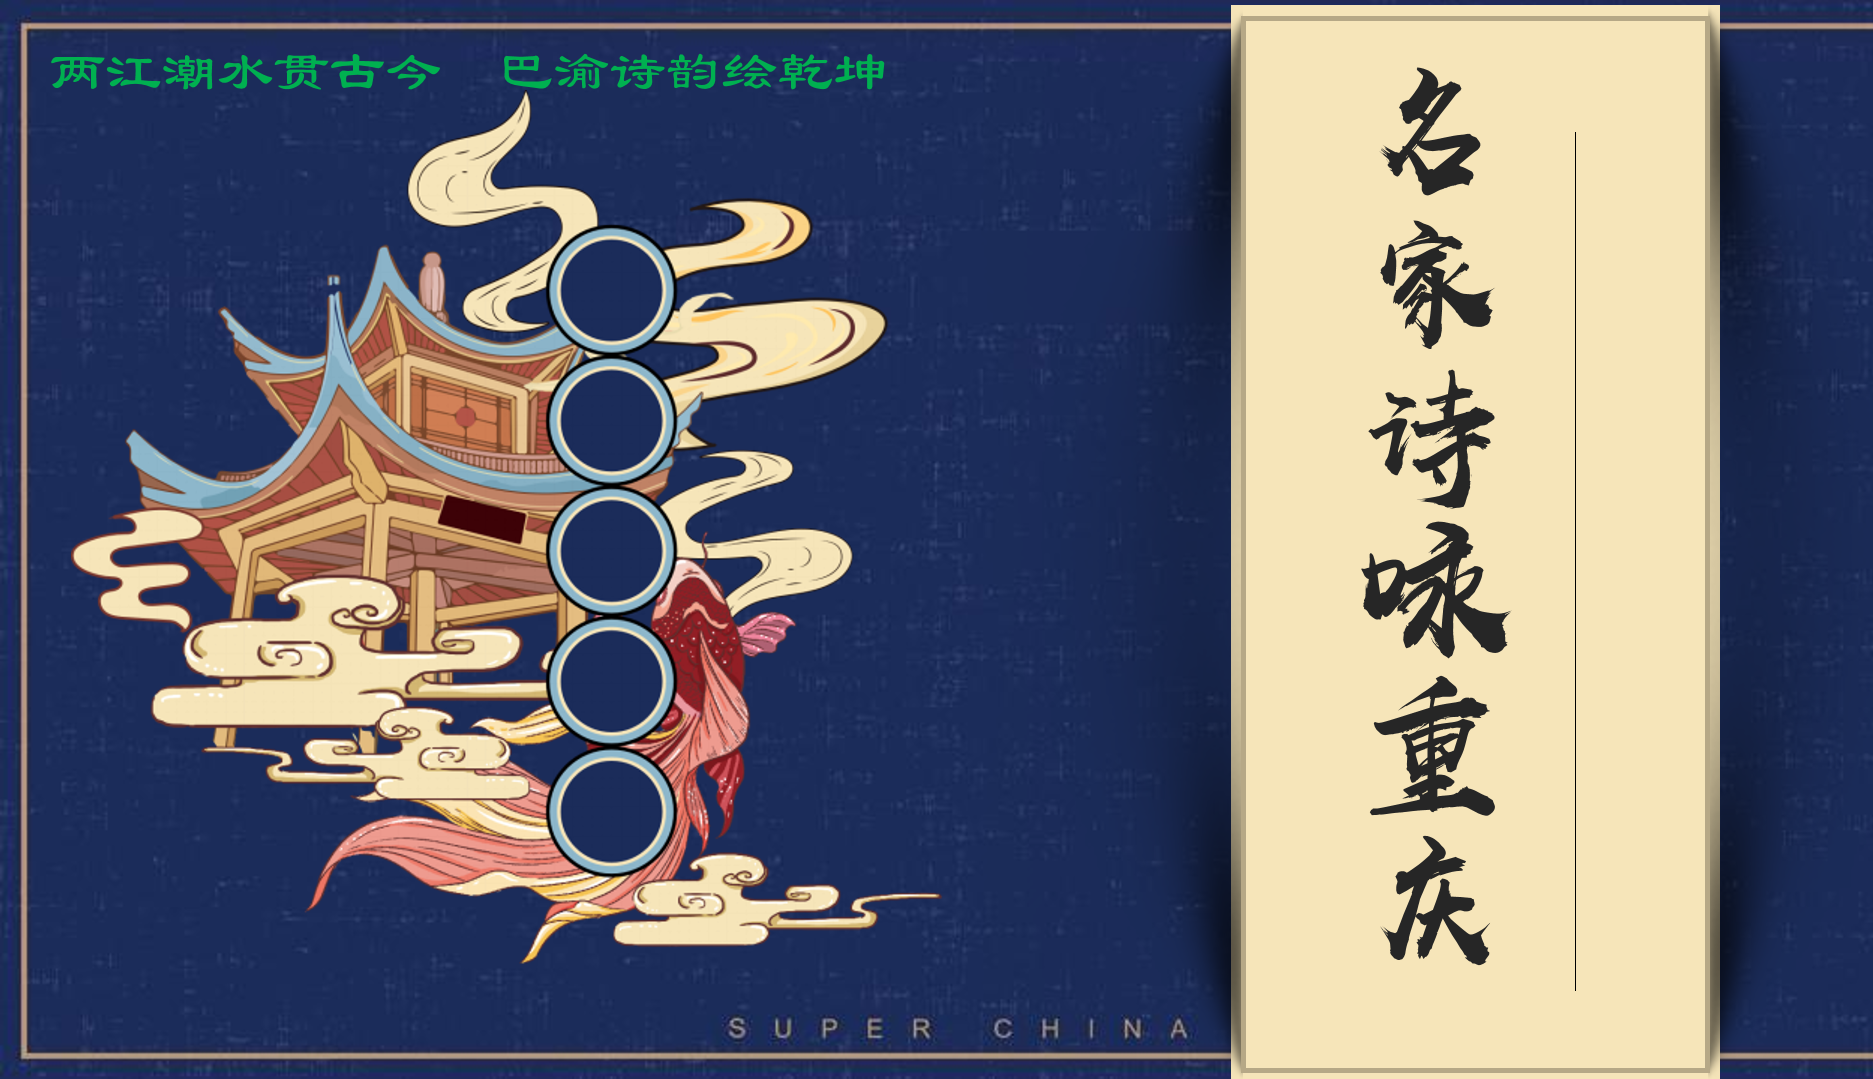 Eminent Poets’ Odes to Chongqing